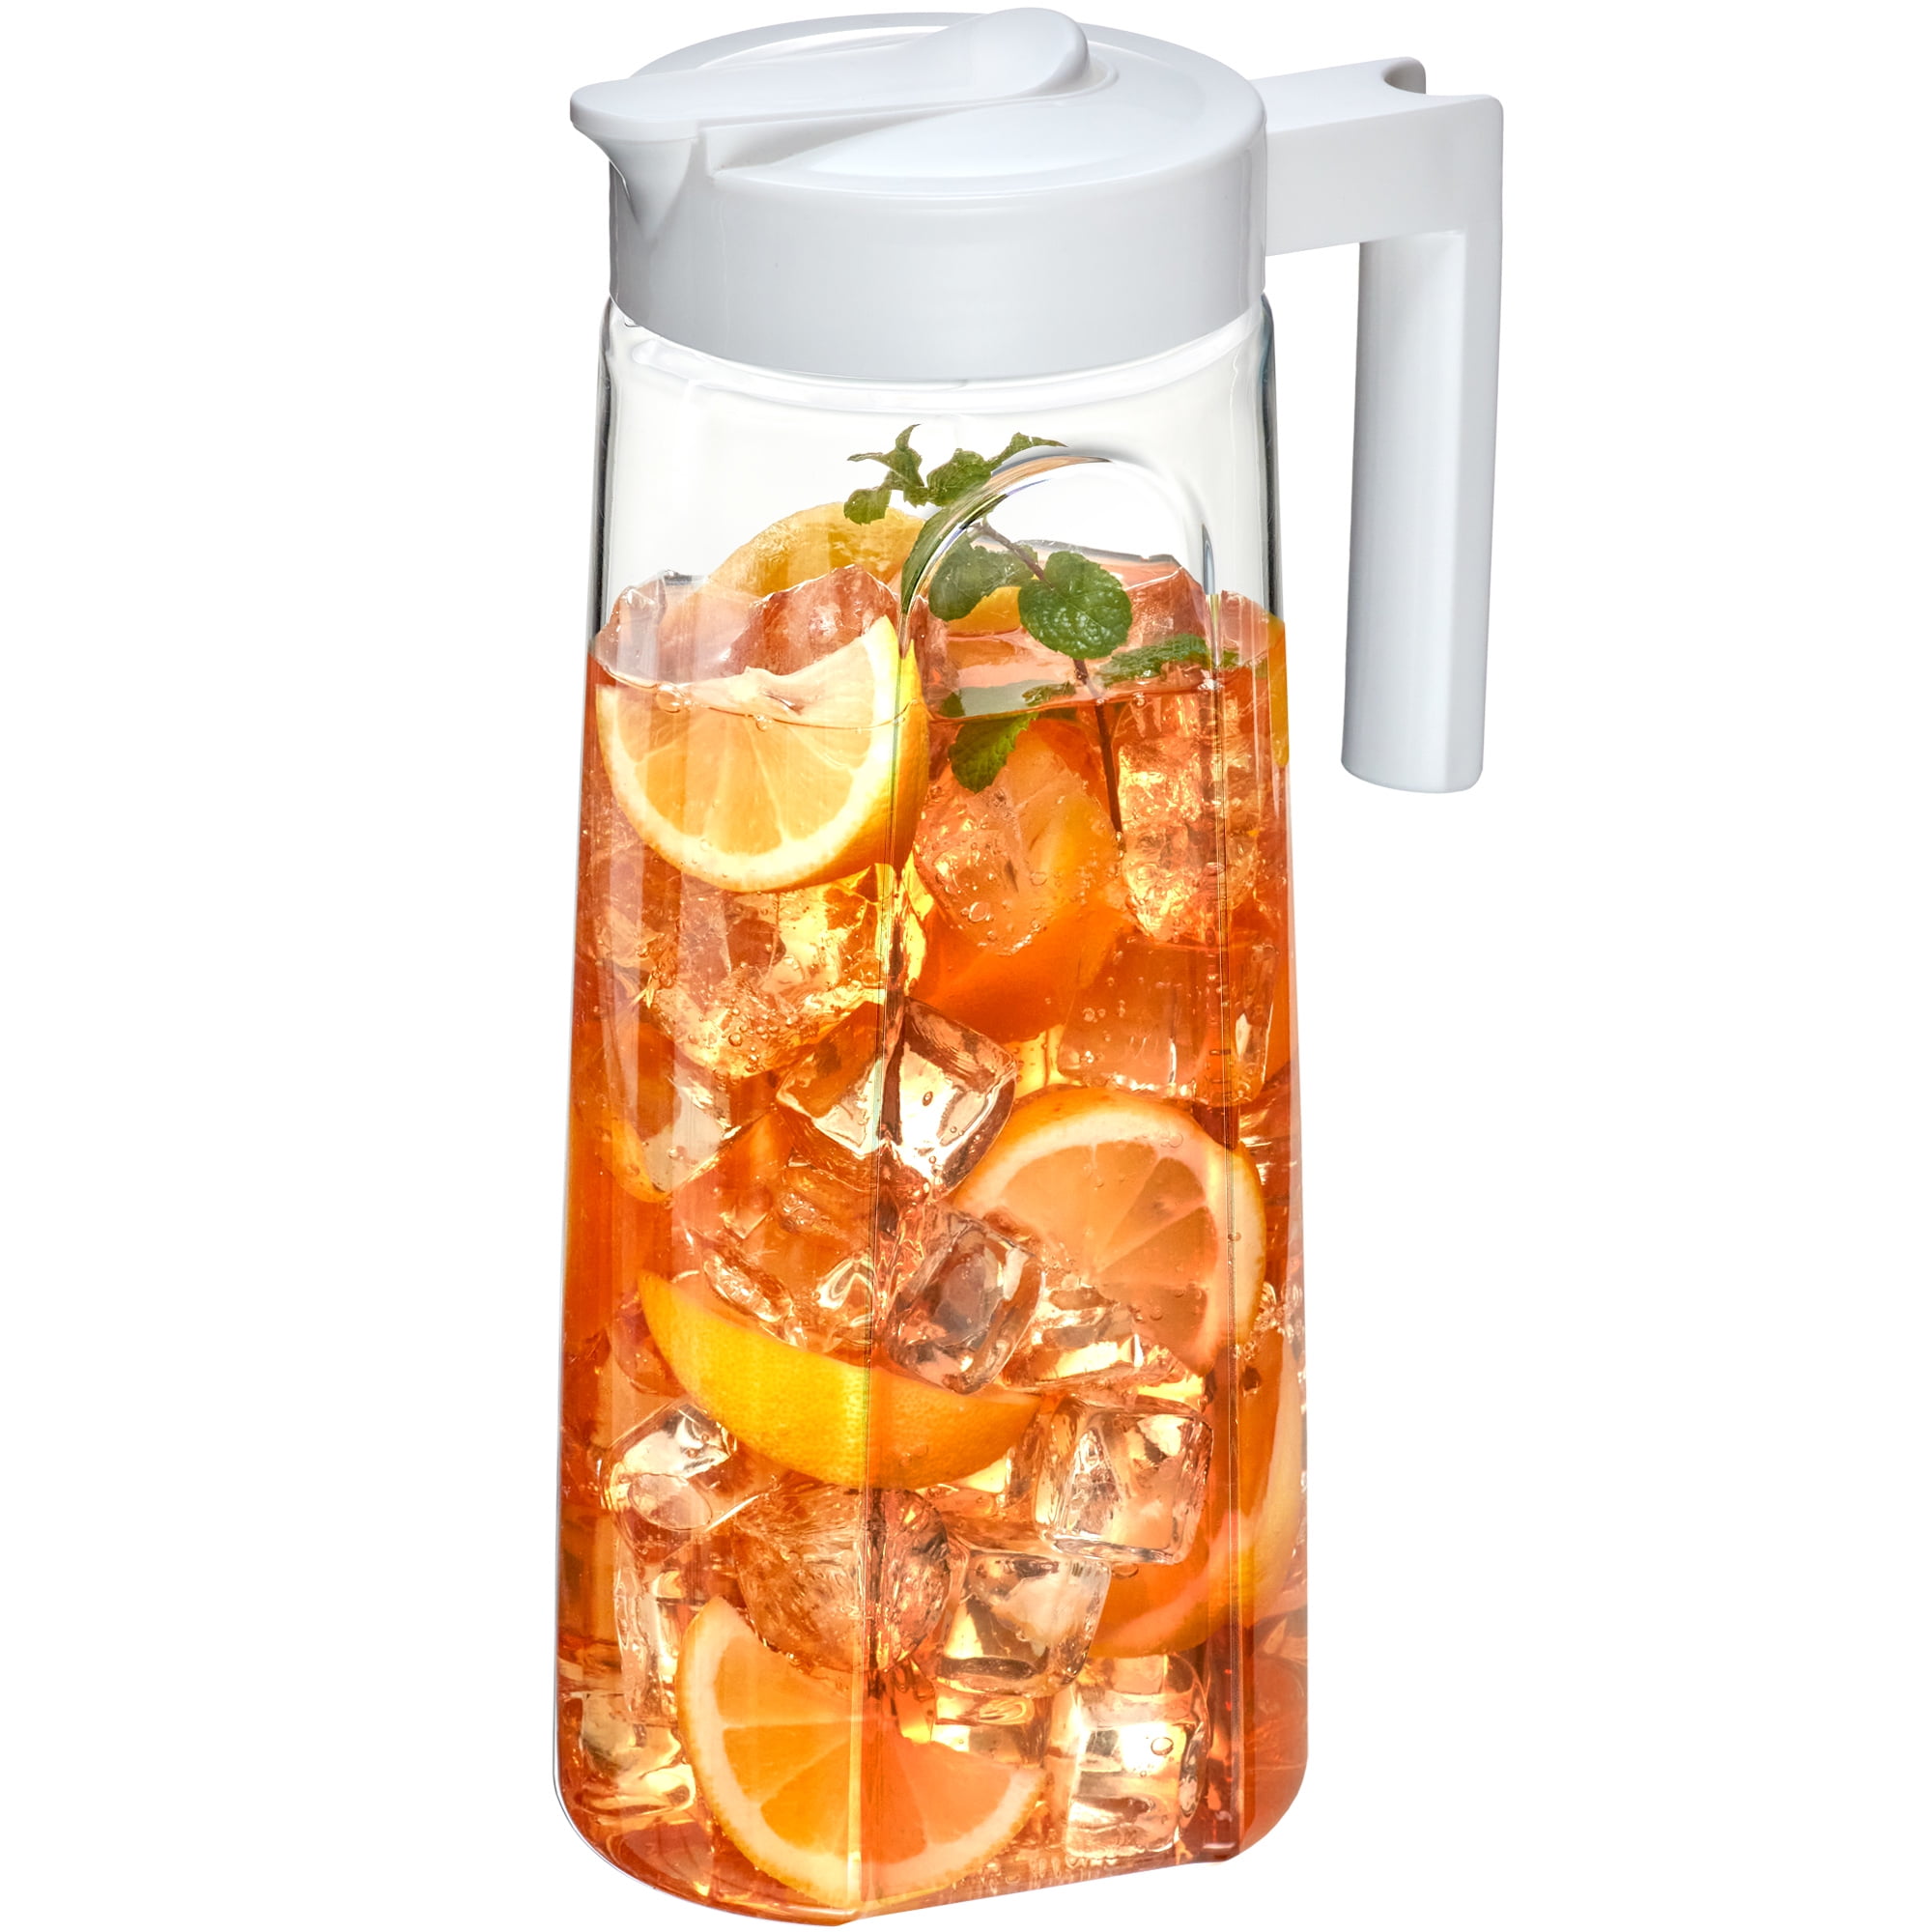 Ice Tea Pitcher Beverage Drinking Pitcher Cold Unbreakable Plastic Pitcher  With Lid For Brew Iced Tea Without Ever Boiling Water - AliExpress